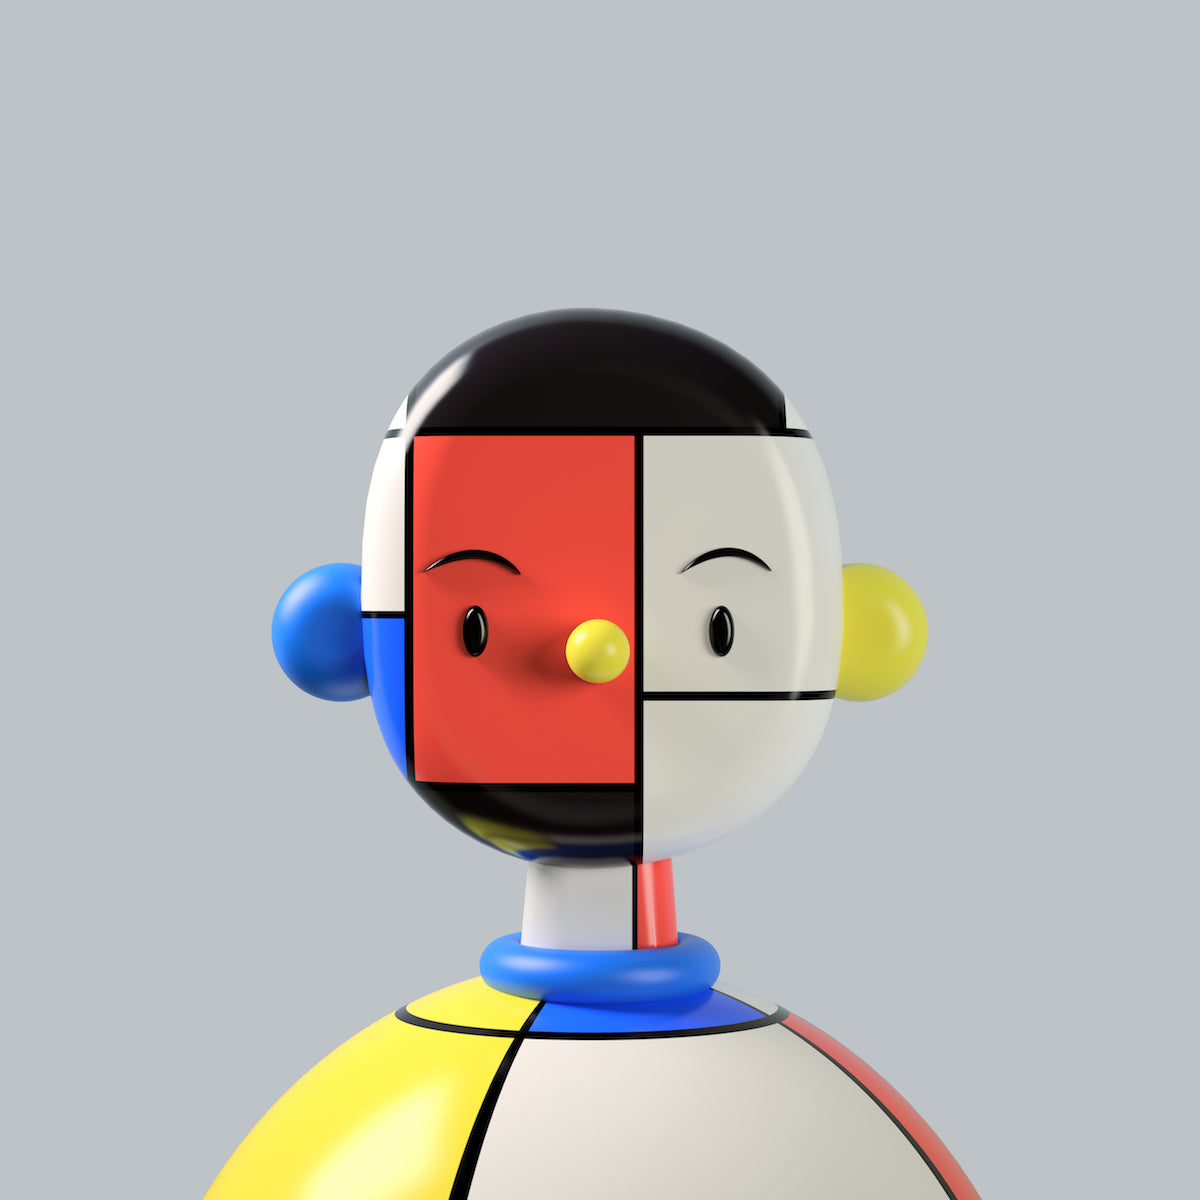 Piet Toy Face by Amrit Pal Singh